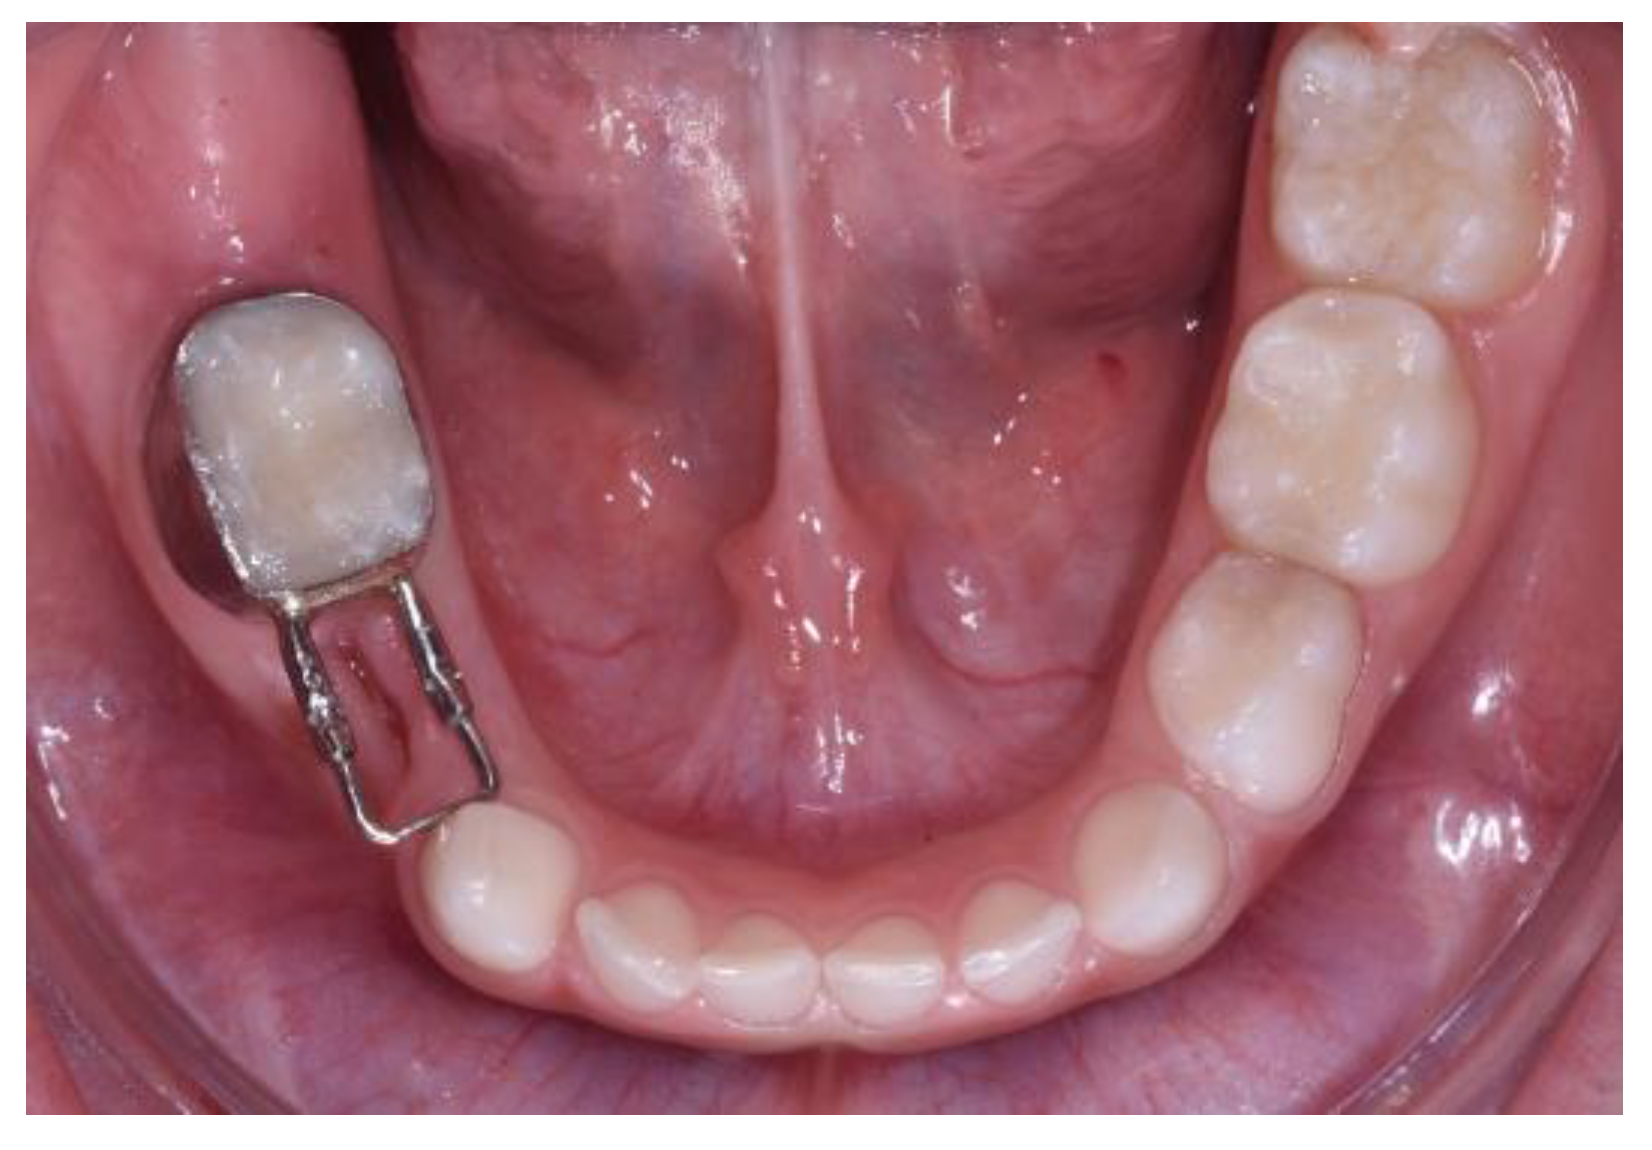 The benefits of space maintainers and clear braces in preventing